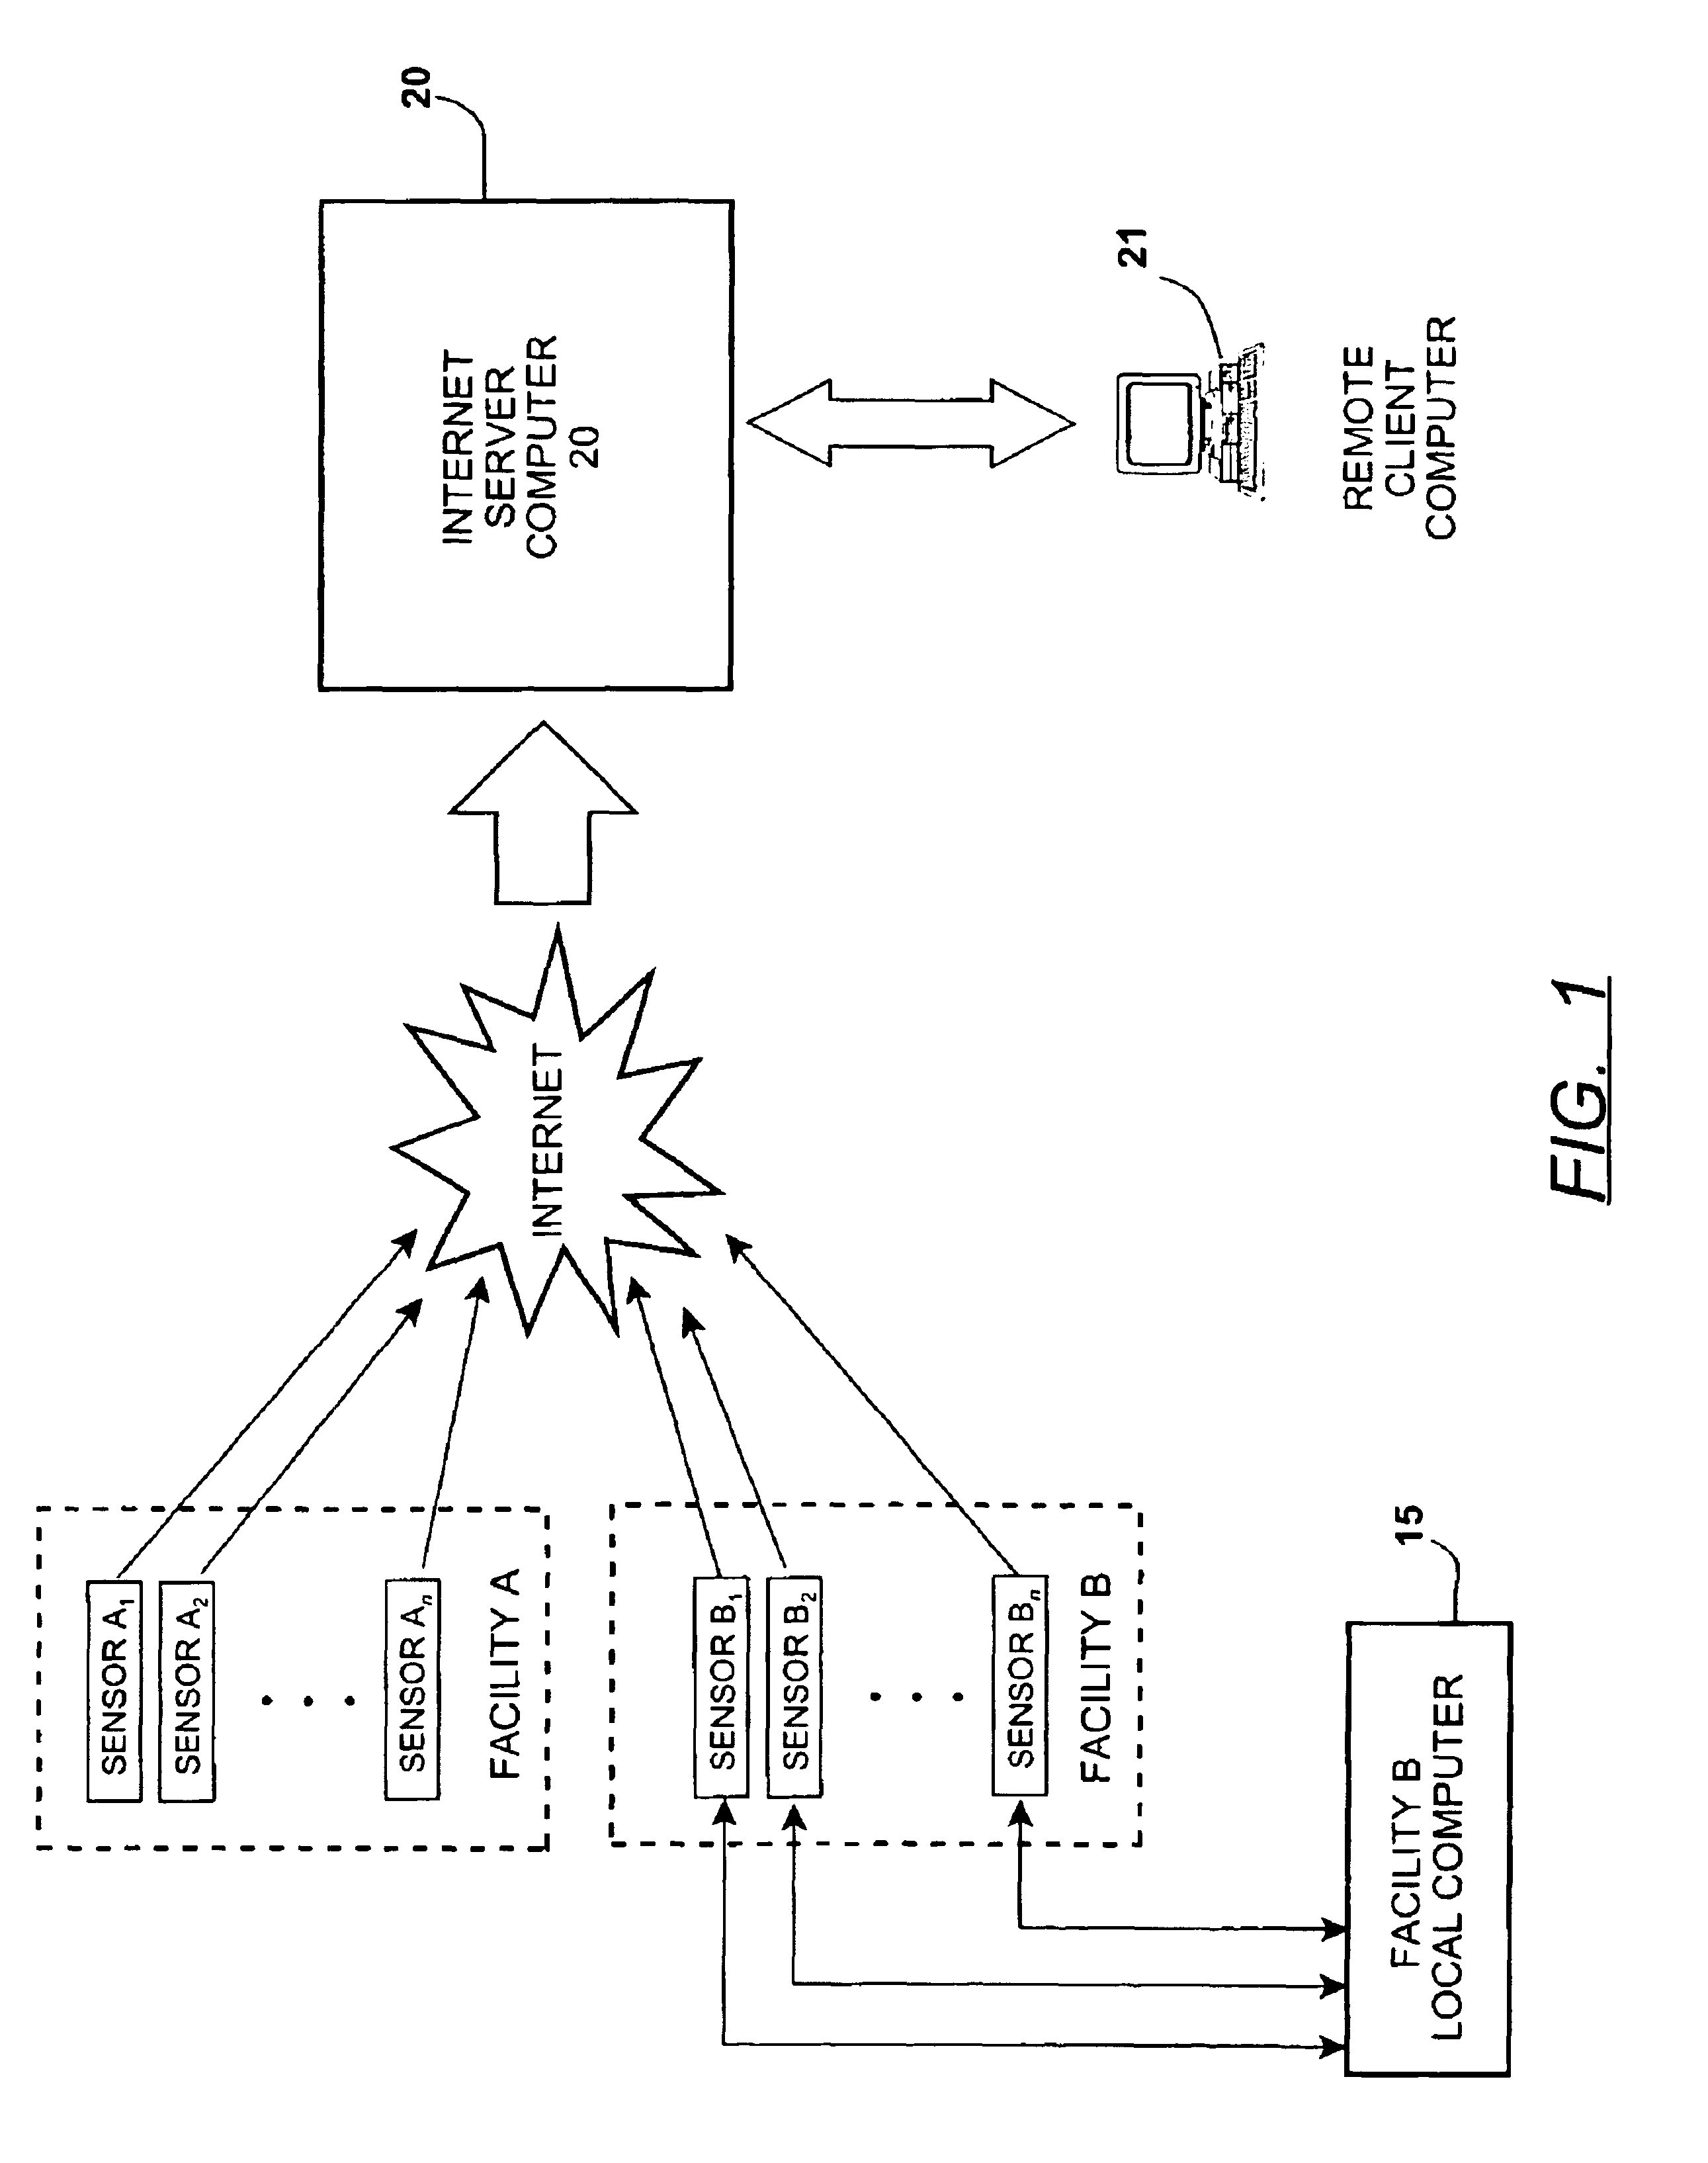 Method for remote monitoring of water treatment systems